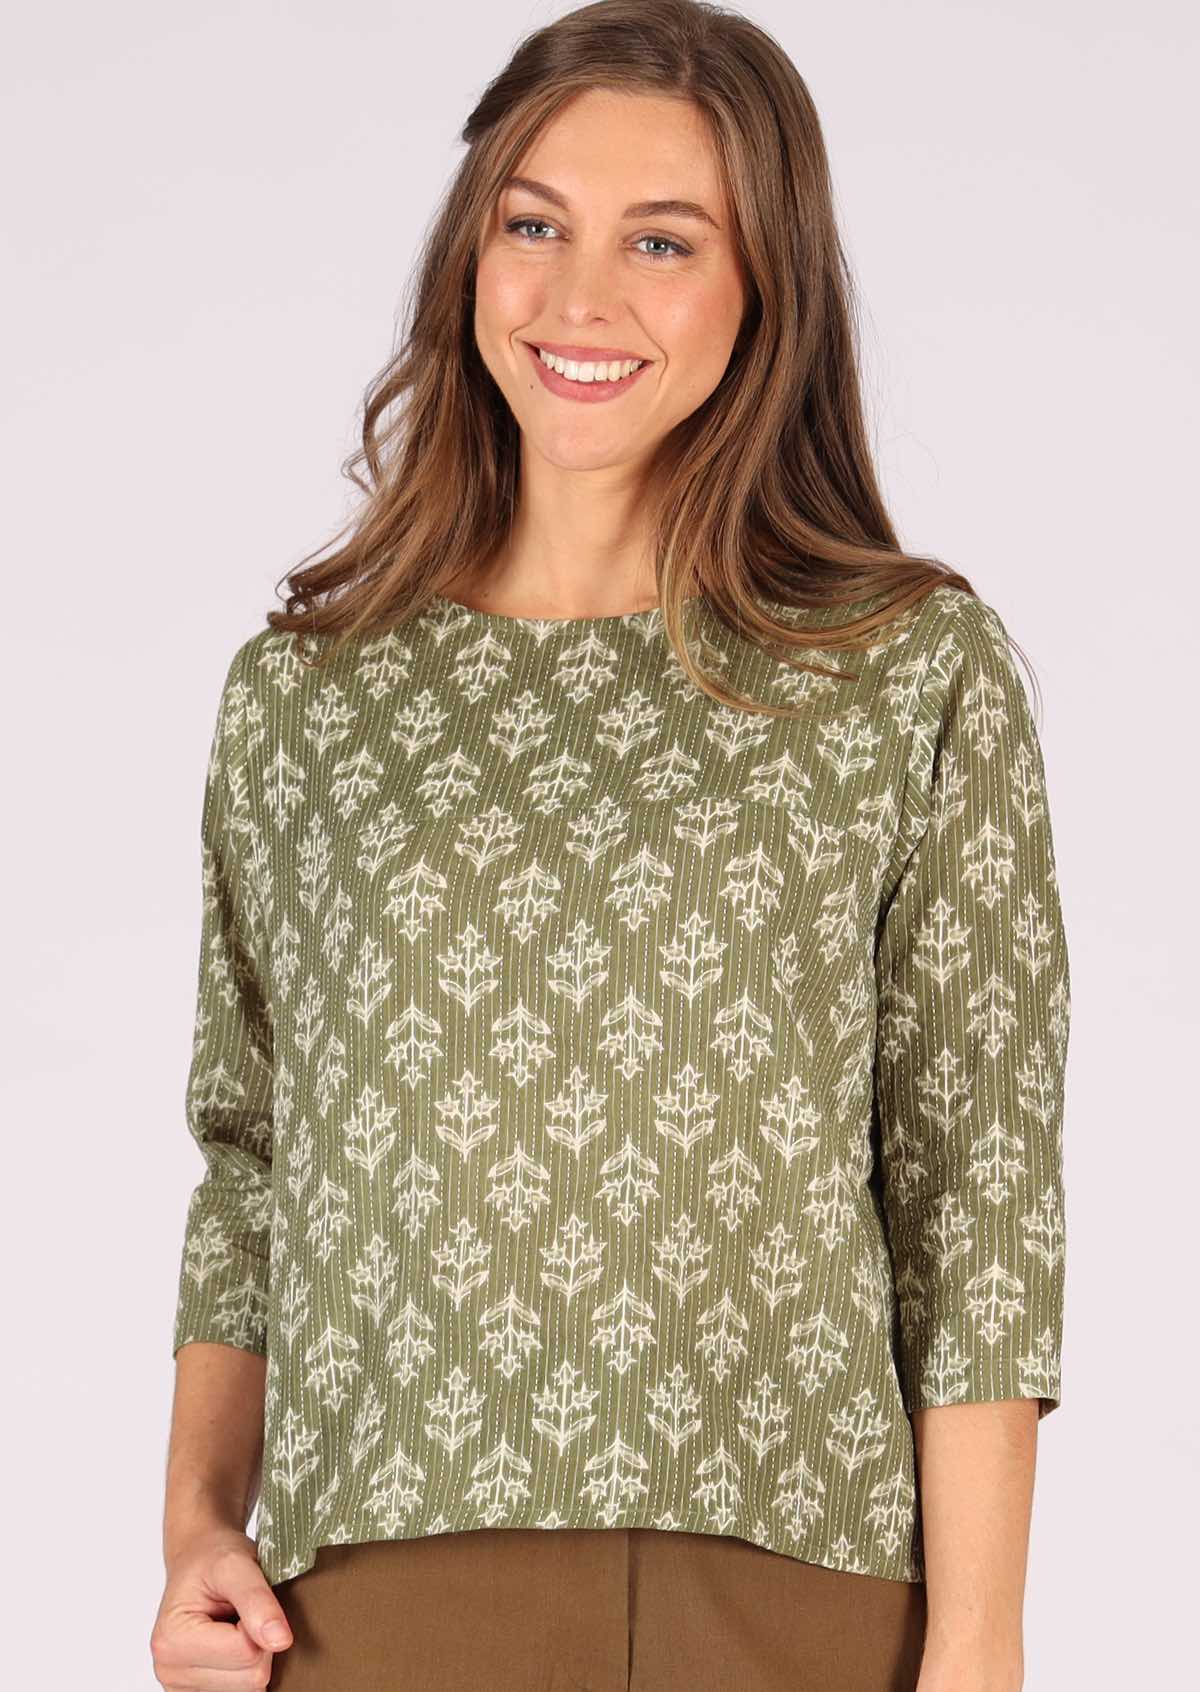 Cotton loose fit top with high round neckline and 3/4 sleeves